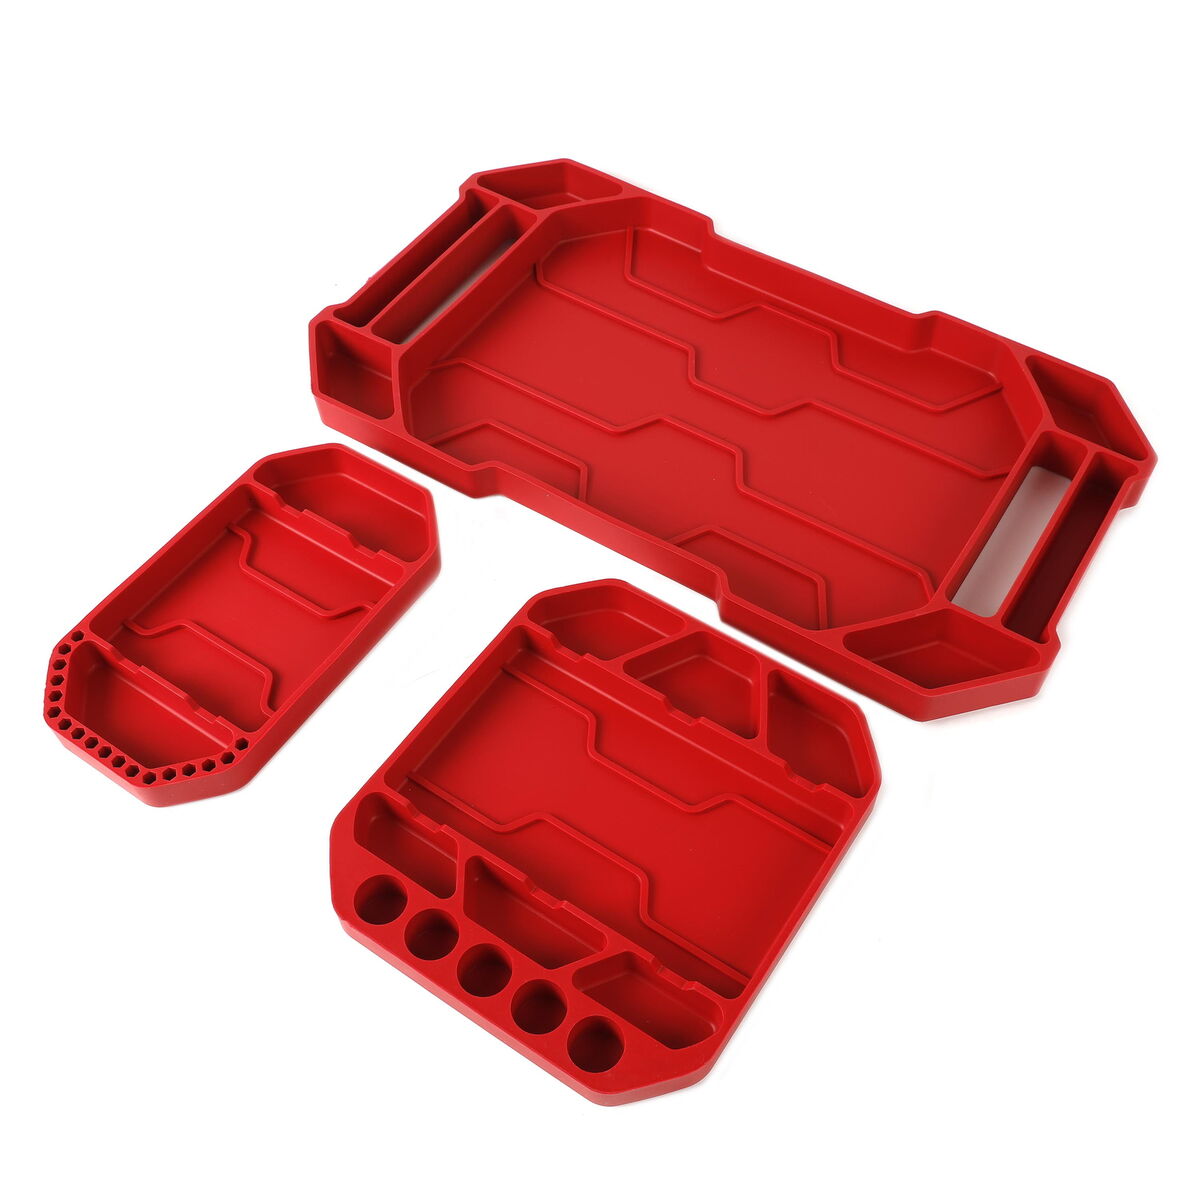 3-Piece Silicone Tool Organizer Tray Flexible Automotive Working on Cars  Truck